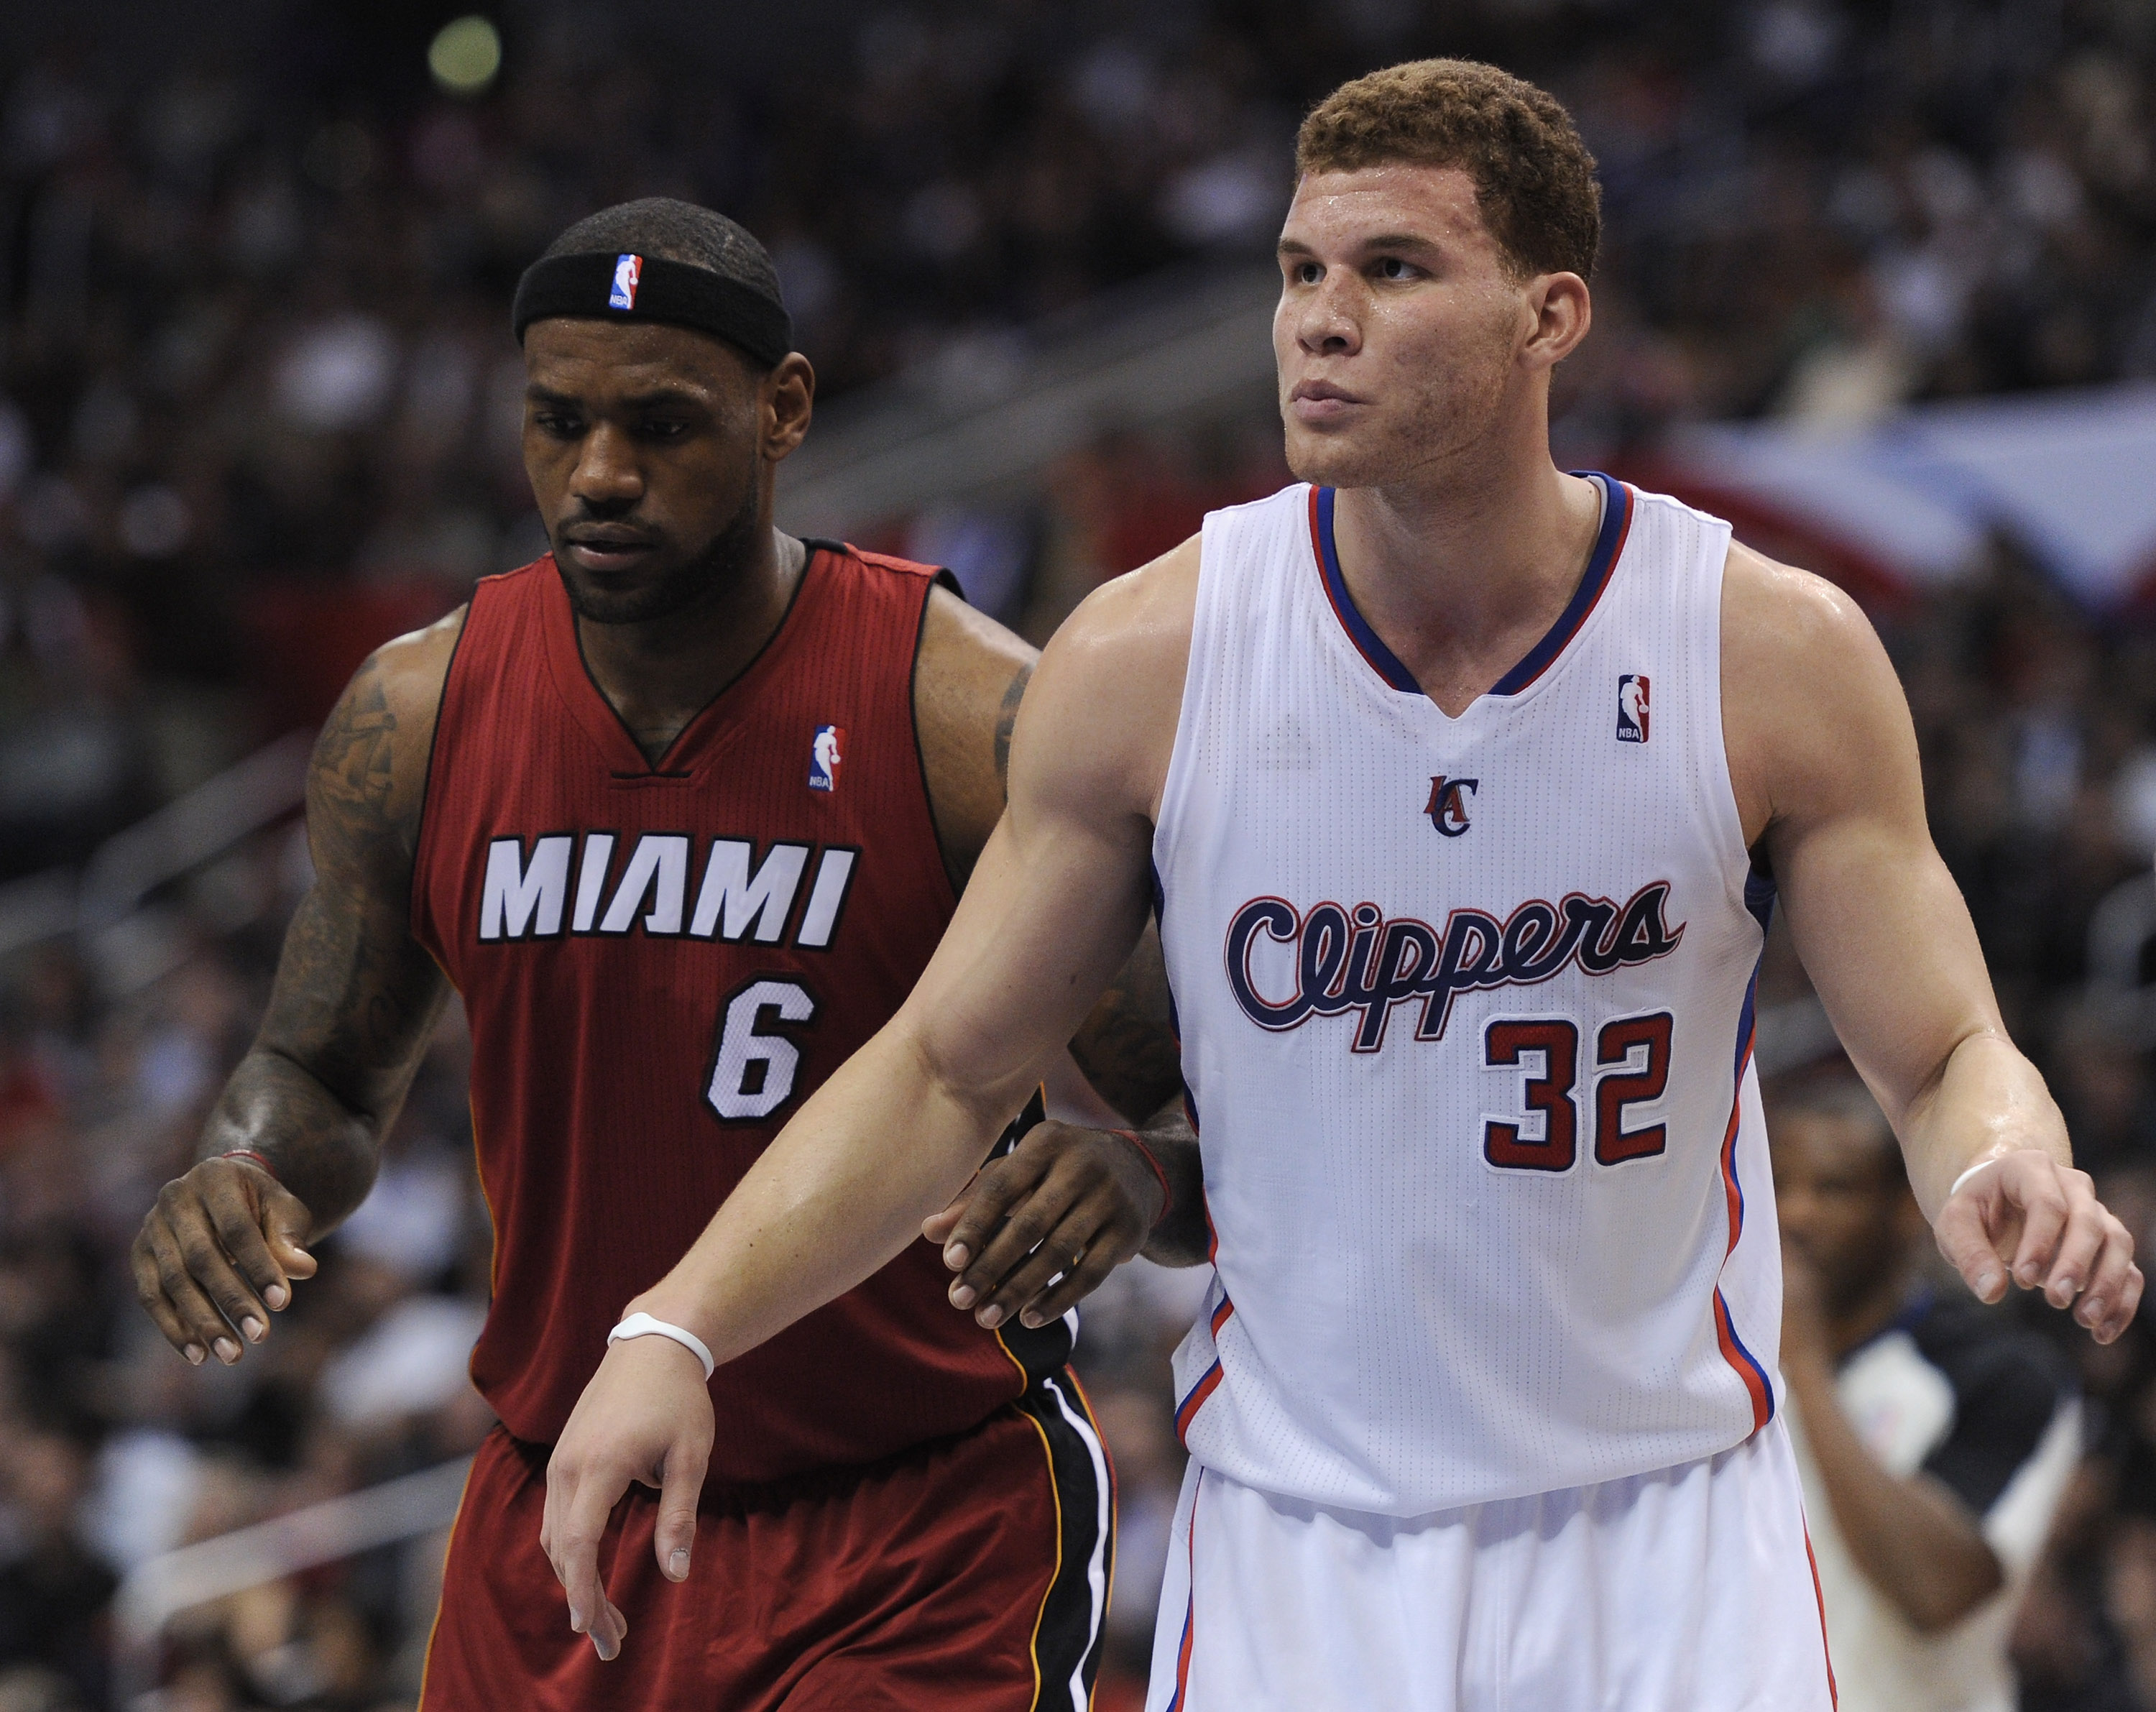 LOS ANGELES, CA - JANUARY 12:  Blake Griffin #32 of the Los Angeles Clippers and LeBron James #6 of  the Miami Heat wait at during a free throw during the first half at the Staples Center on January 12, 2011 in Los Angeles, California.  NOTE TO USER: User